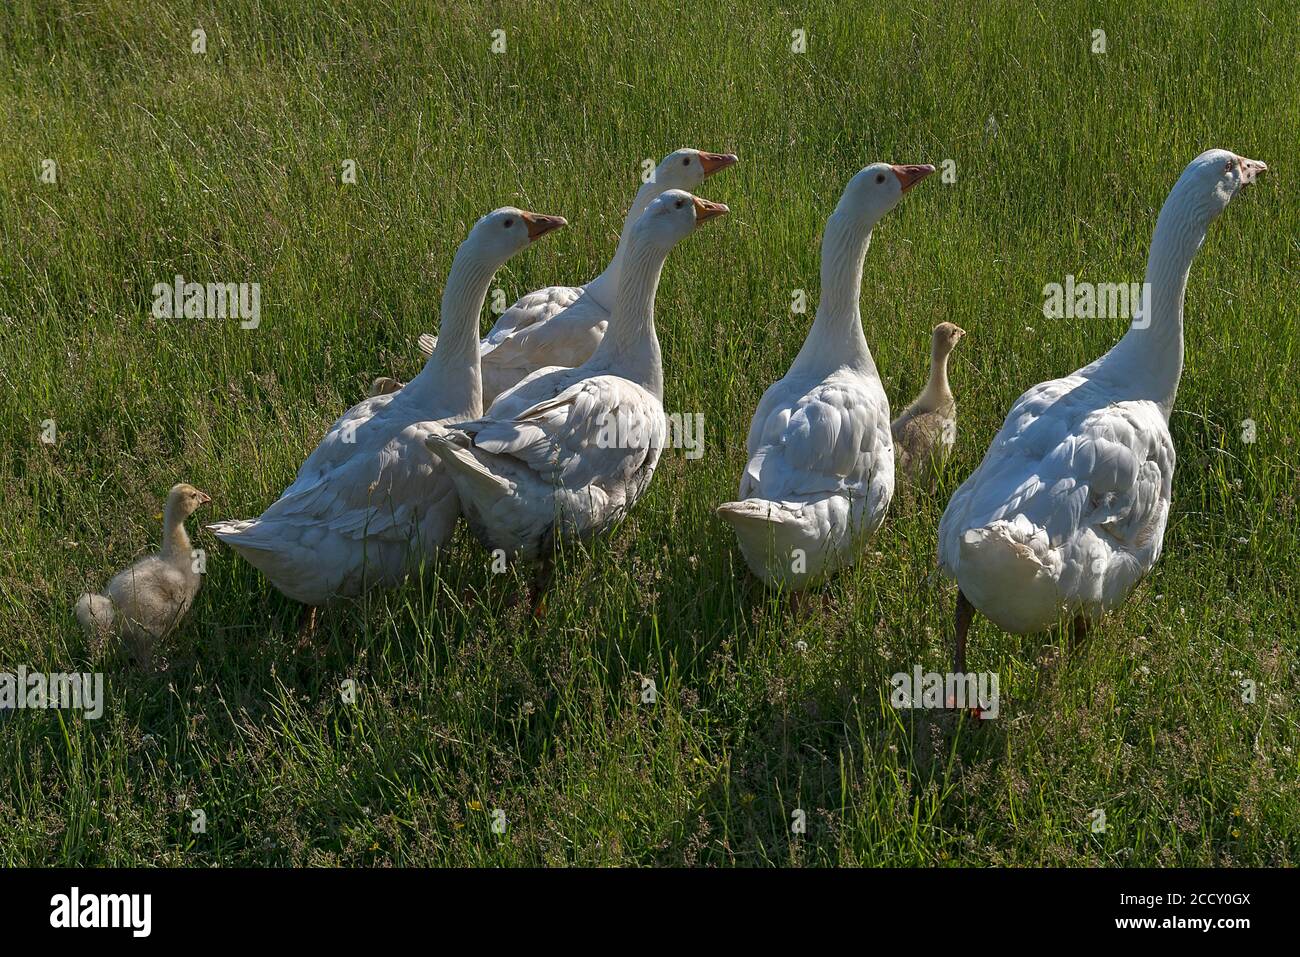 Geese (Anserini) with their young animals, free-range farming, Mecklenburg-Western Pomerania, Germany Stock Photo